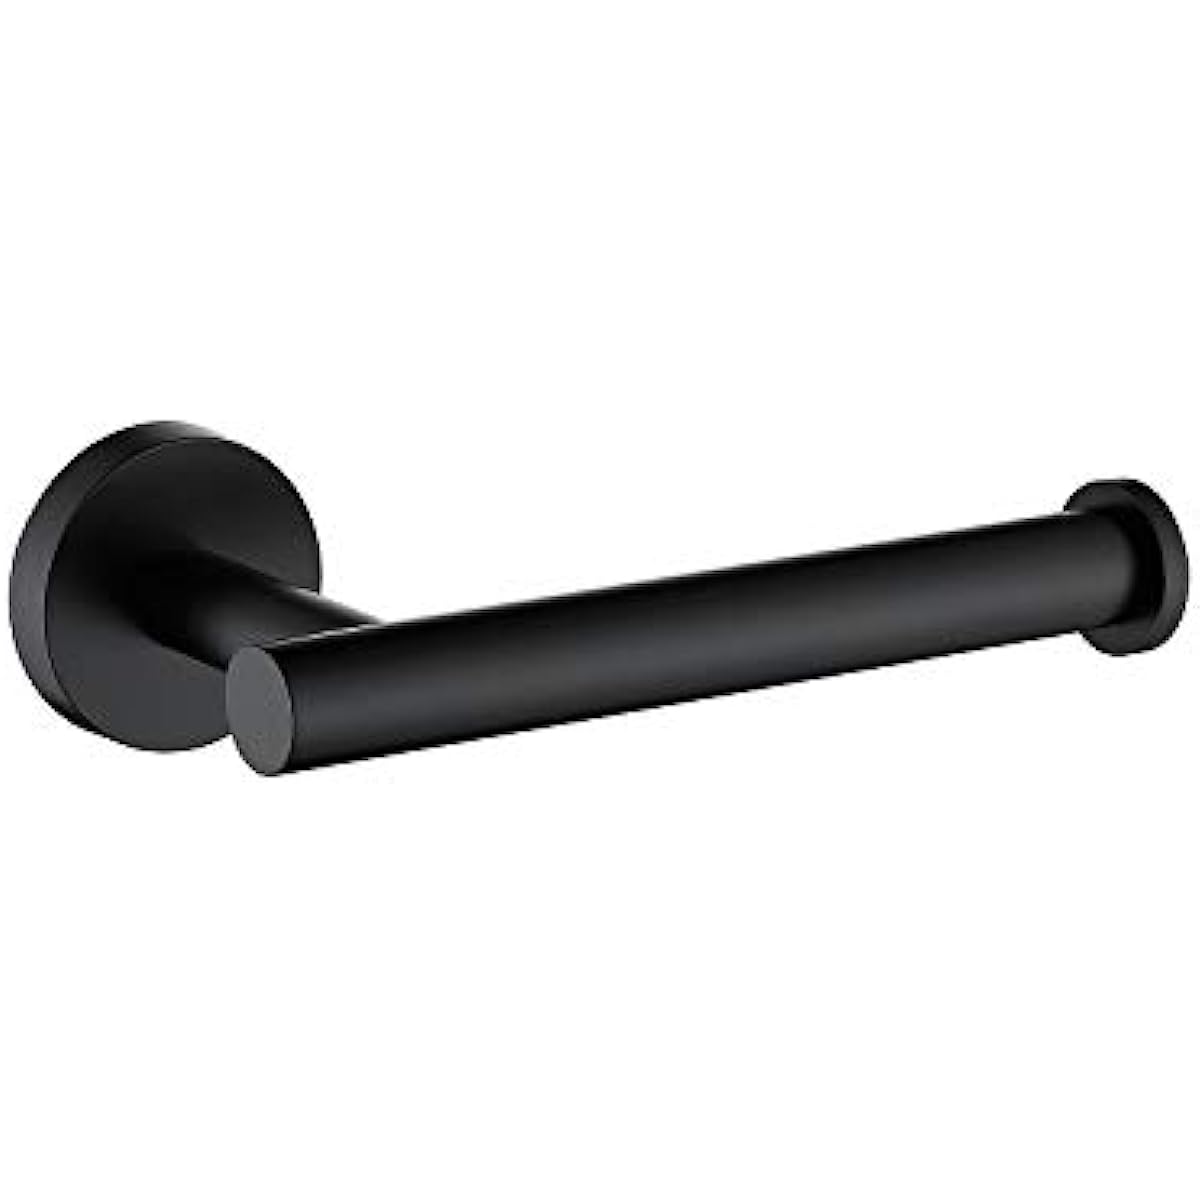 Cilee Toilet Paper Holder Stand with Toilet Brush, Matte Black